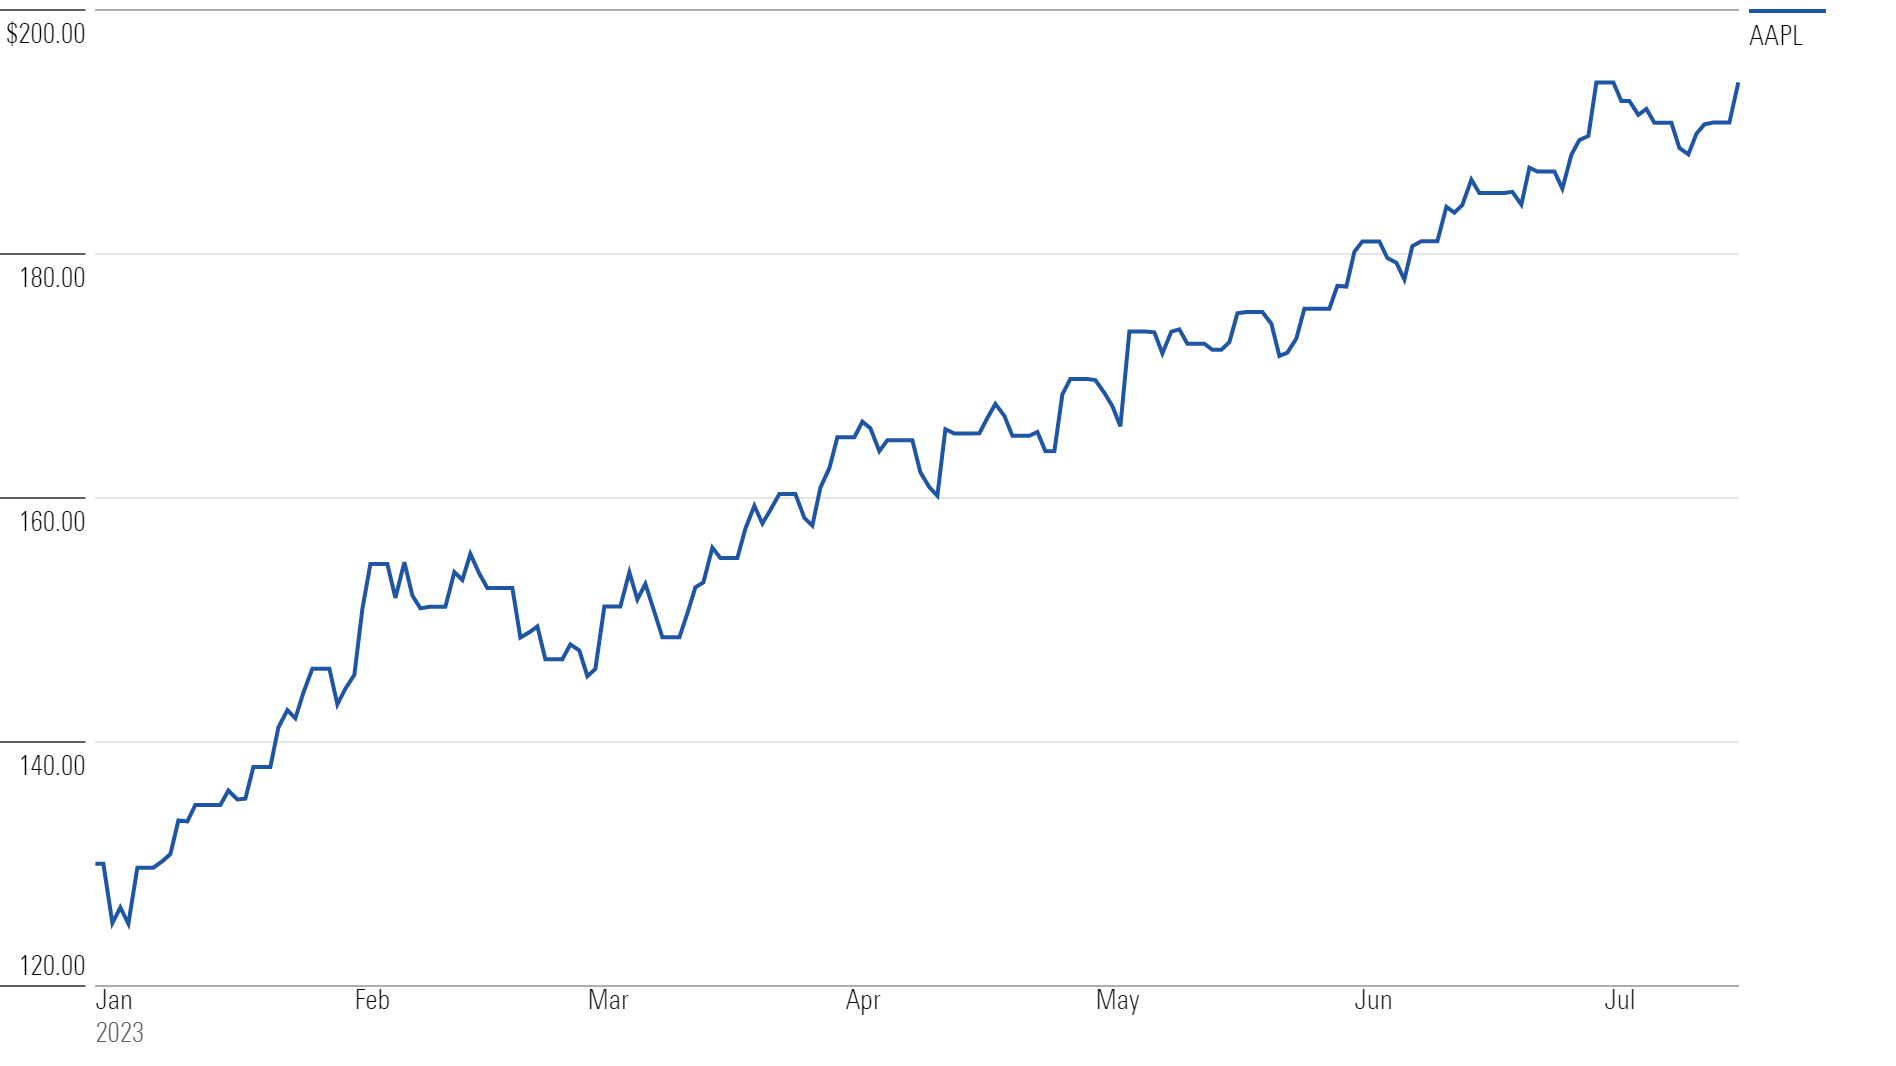 Line chart showing Apple's stock price from Jan 2023 through July 17, 2023.